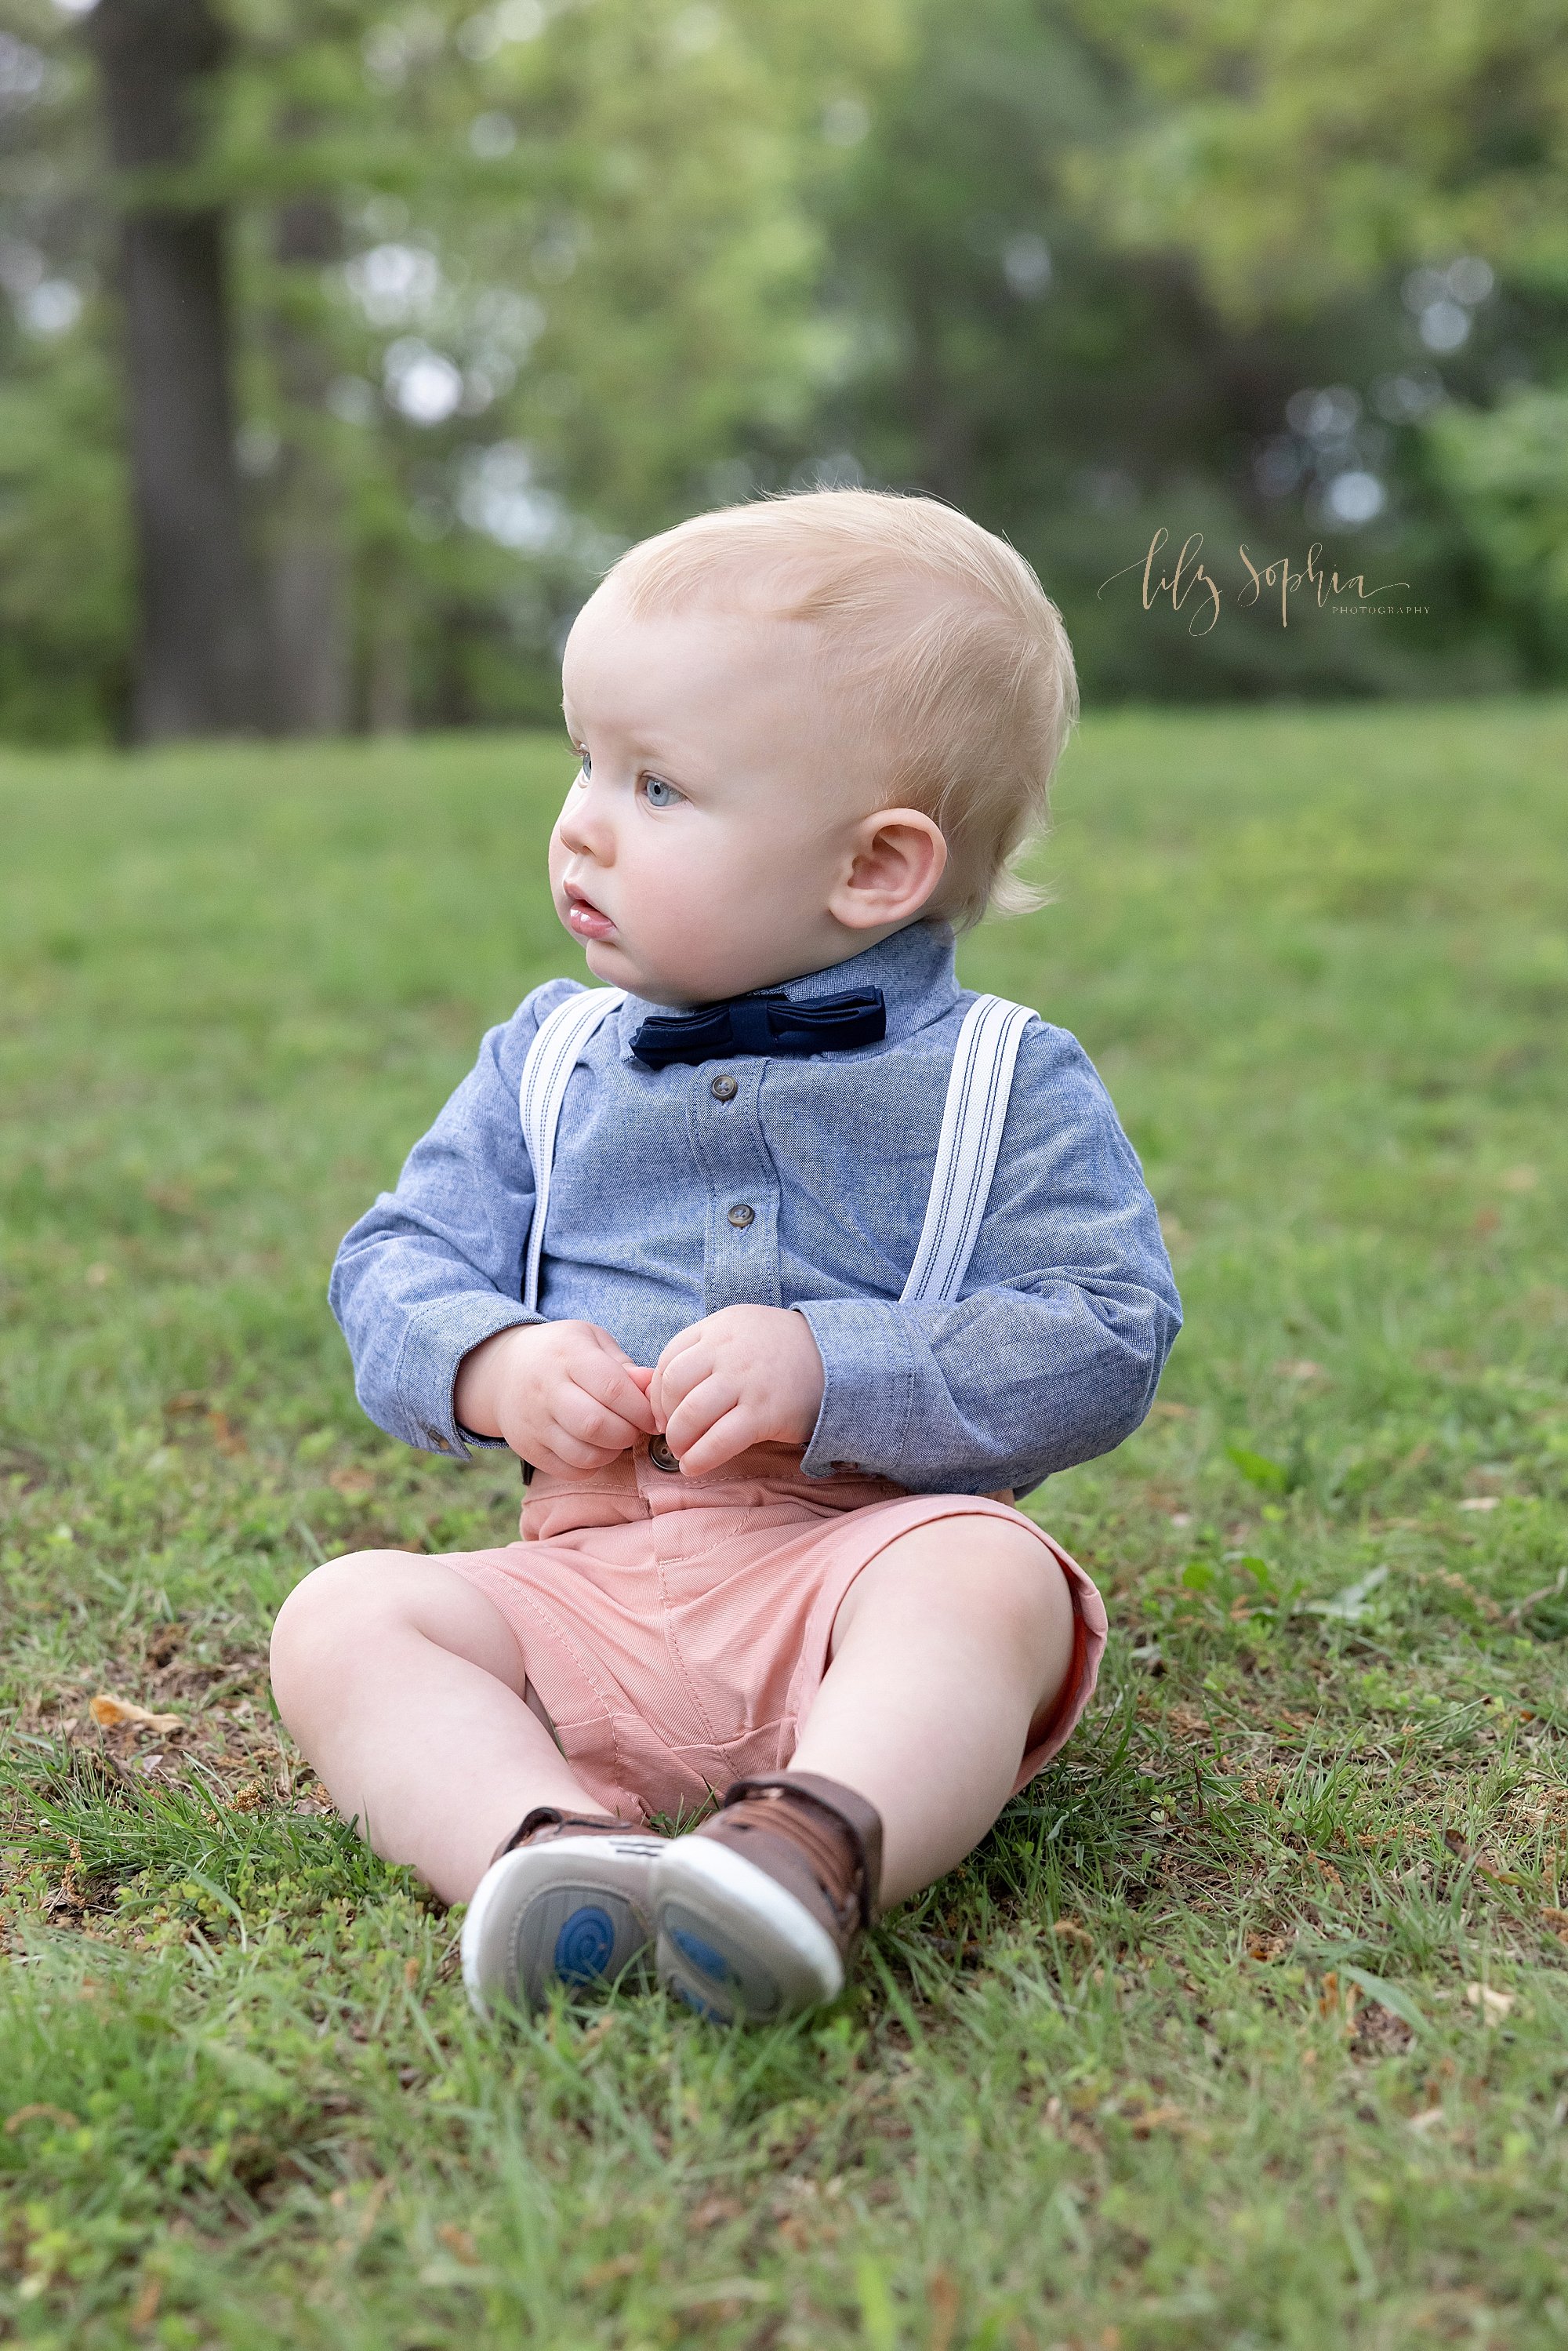  Toddler portrait of a little boy wearing a blue button down shirt, a blue bow tie and striped suspenders to hold up his peach colored shorts as he sits in an Atlanta park at sunset while turning his head to the right. 